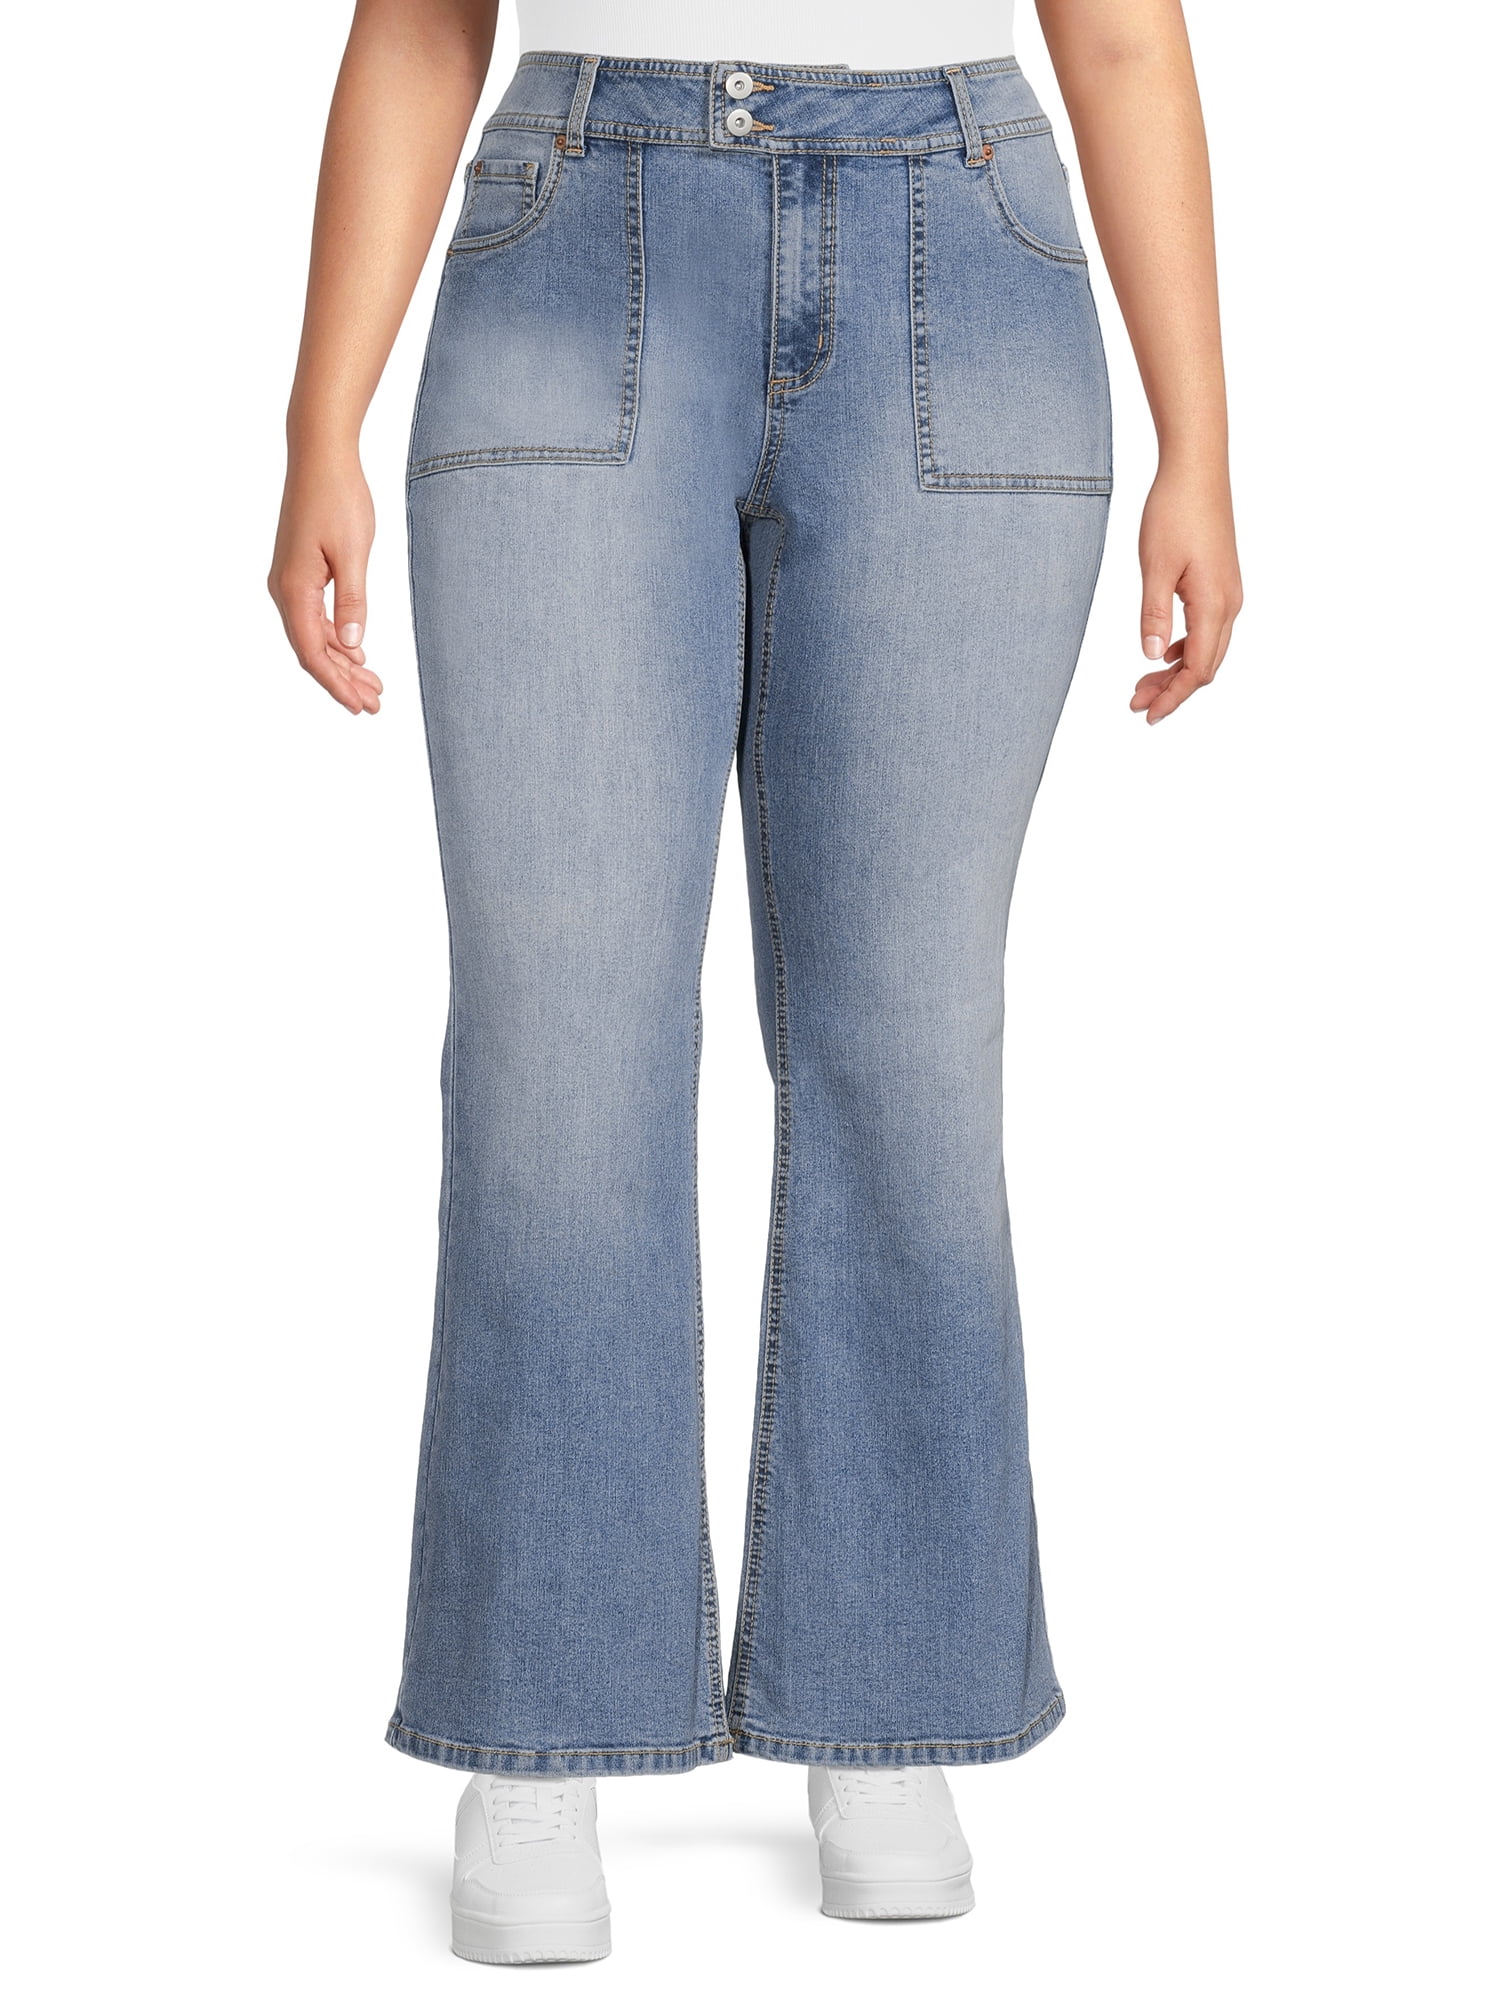 Low rise plus size jeans, when it comes to selecting low-rise plus-size jeans, the process involves a blend of fashion, fit, comfort